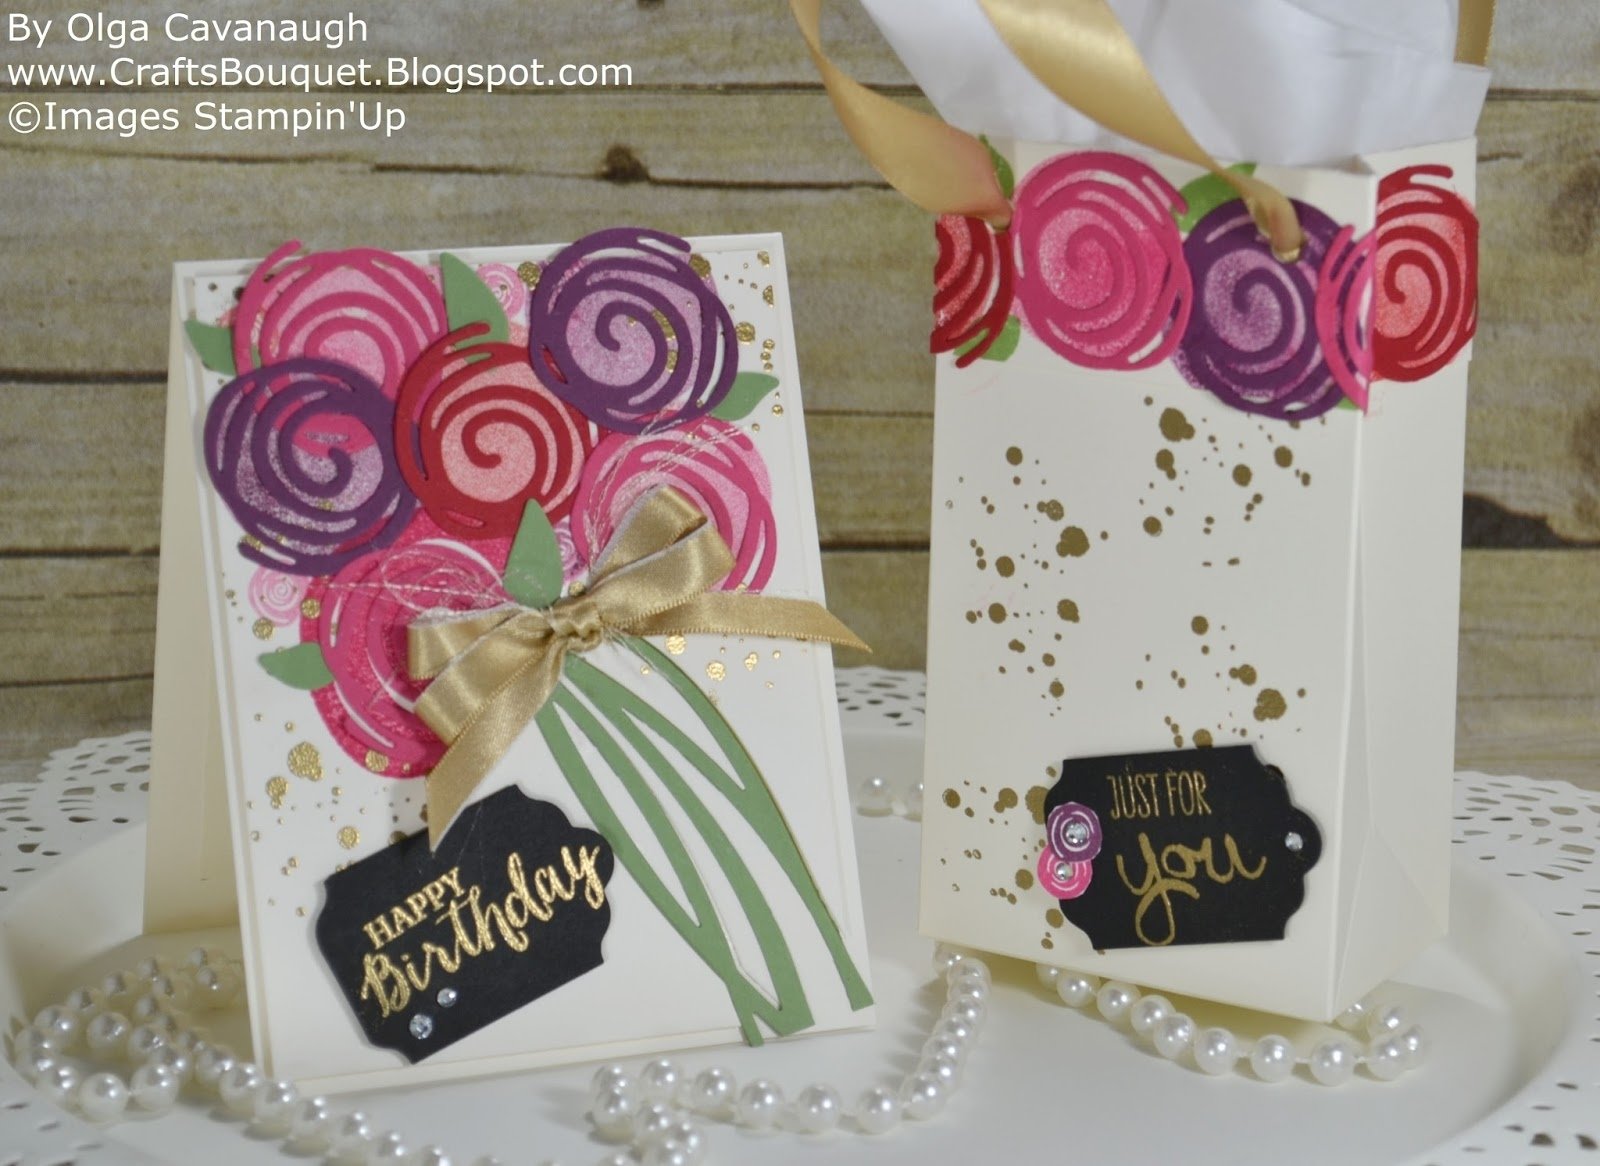 10 Trendy Stampin Up Birthday Card Ideas crafts bouquet stampinup swirly bird birthday card and gift bag 2022